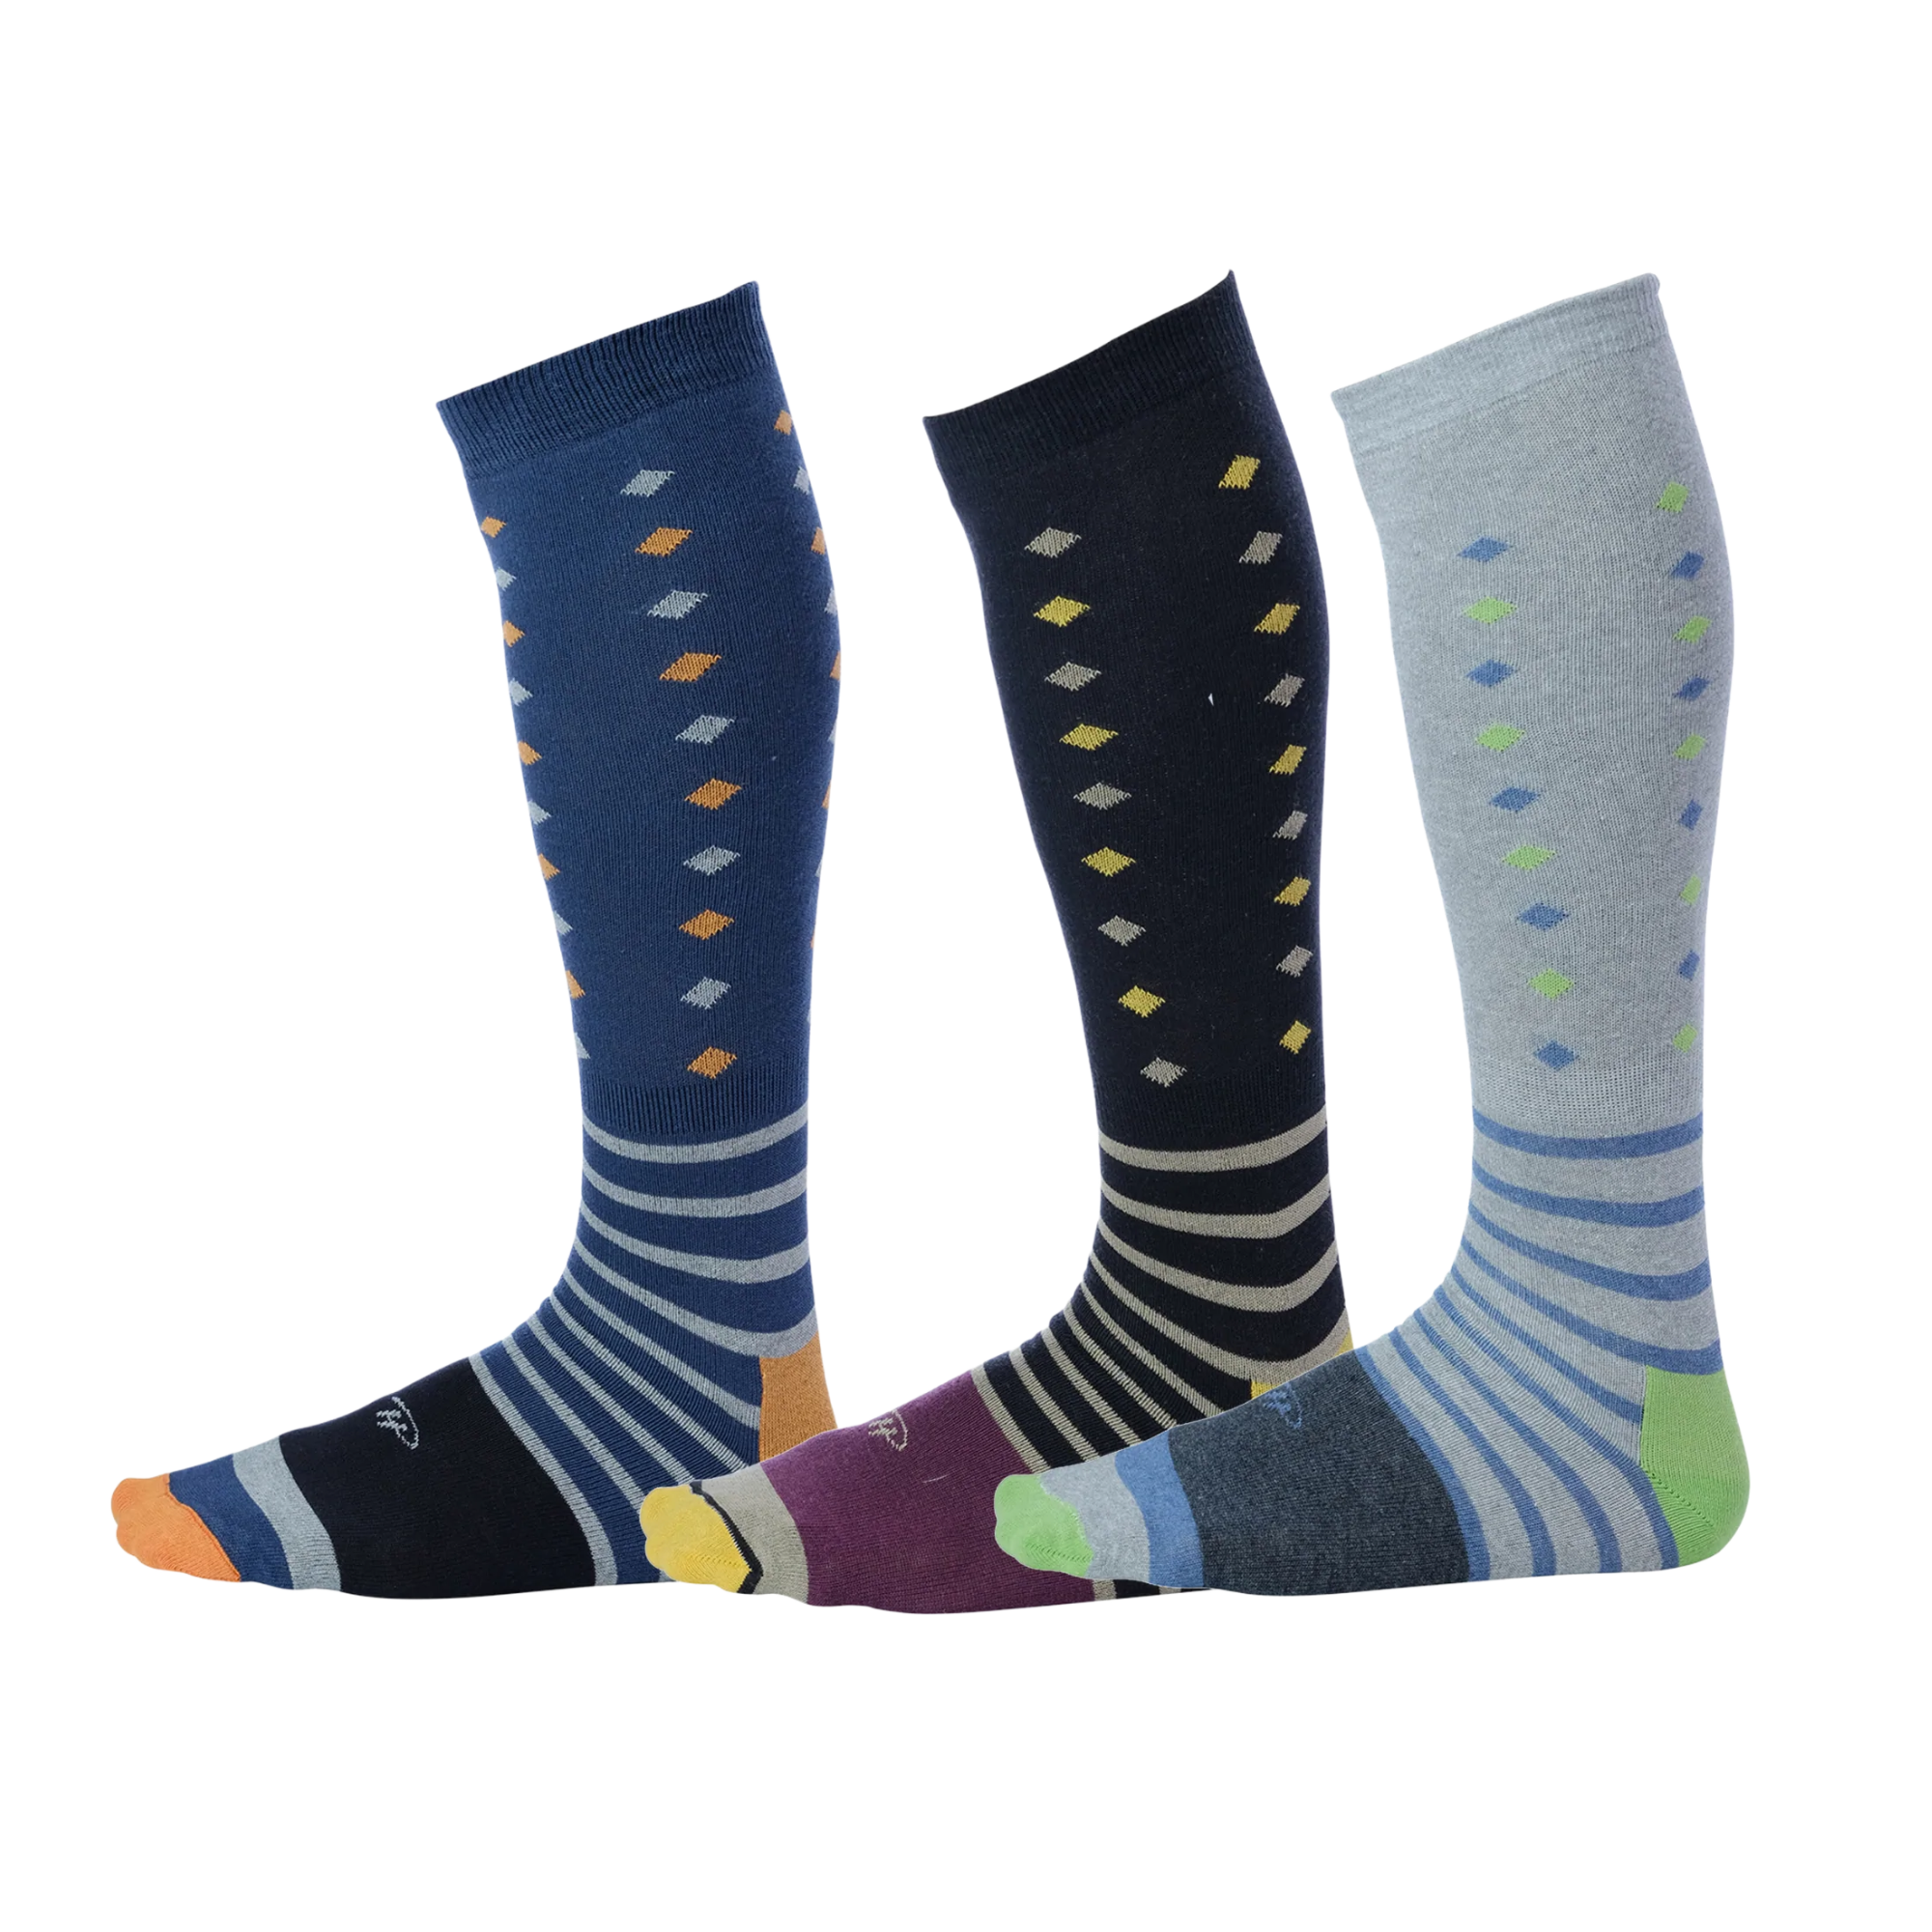 blue dress socks with colored diamonds and stripes, black dress socks with colored diamonds and stripes, light grey colored diamonds and stripes